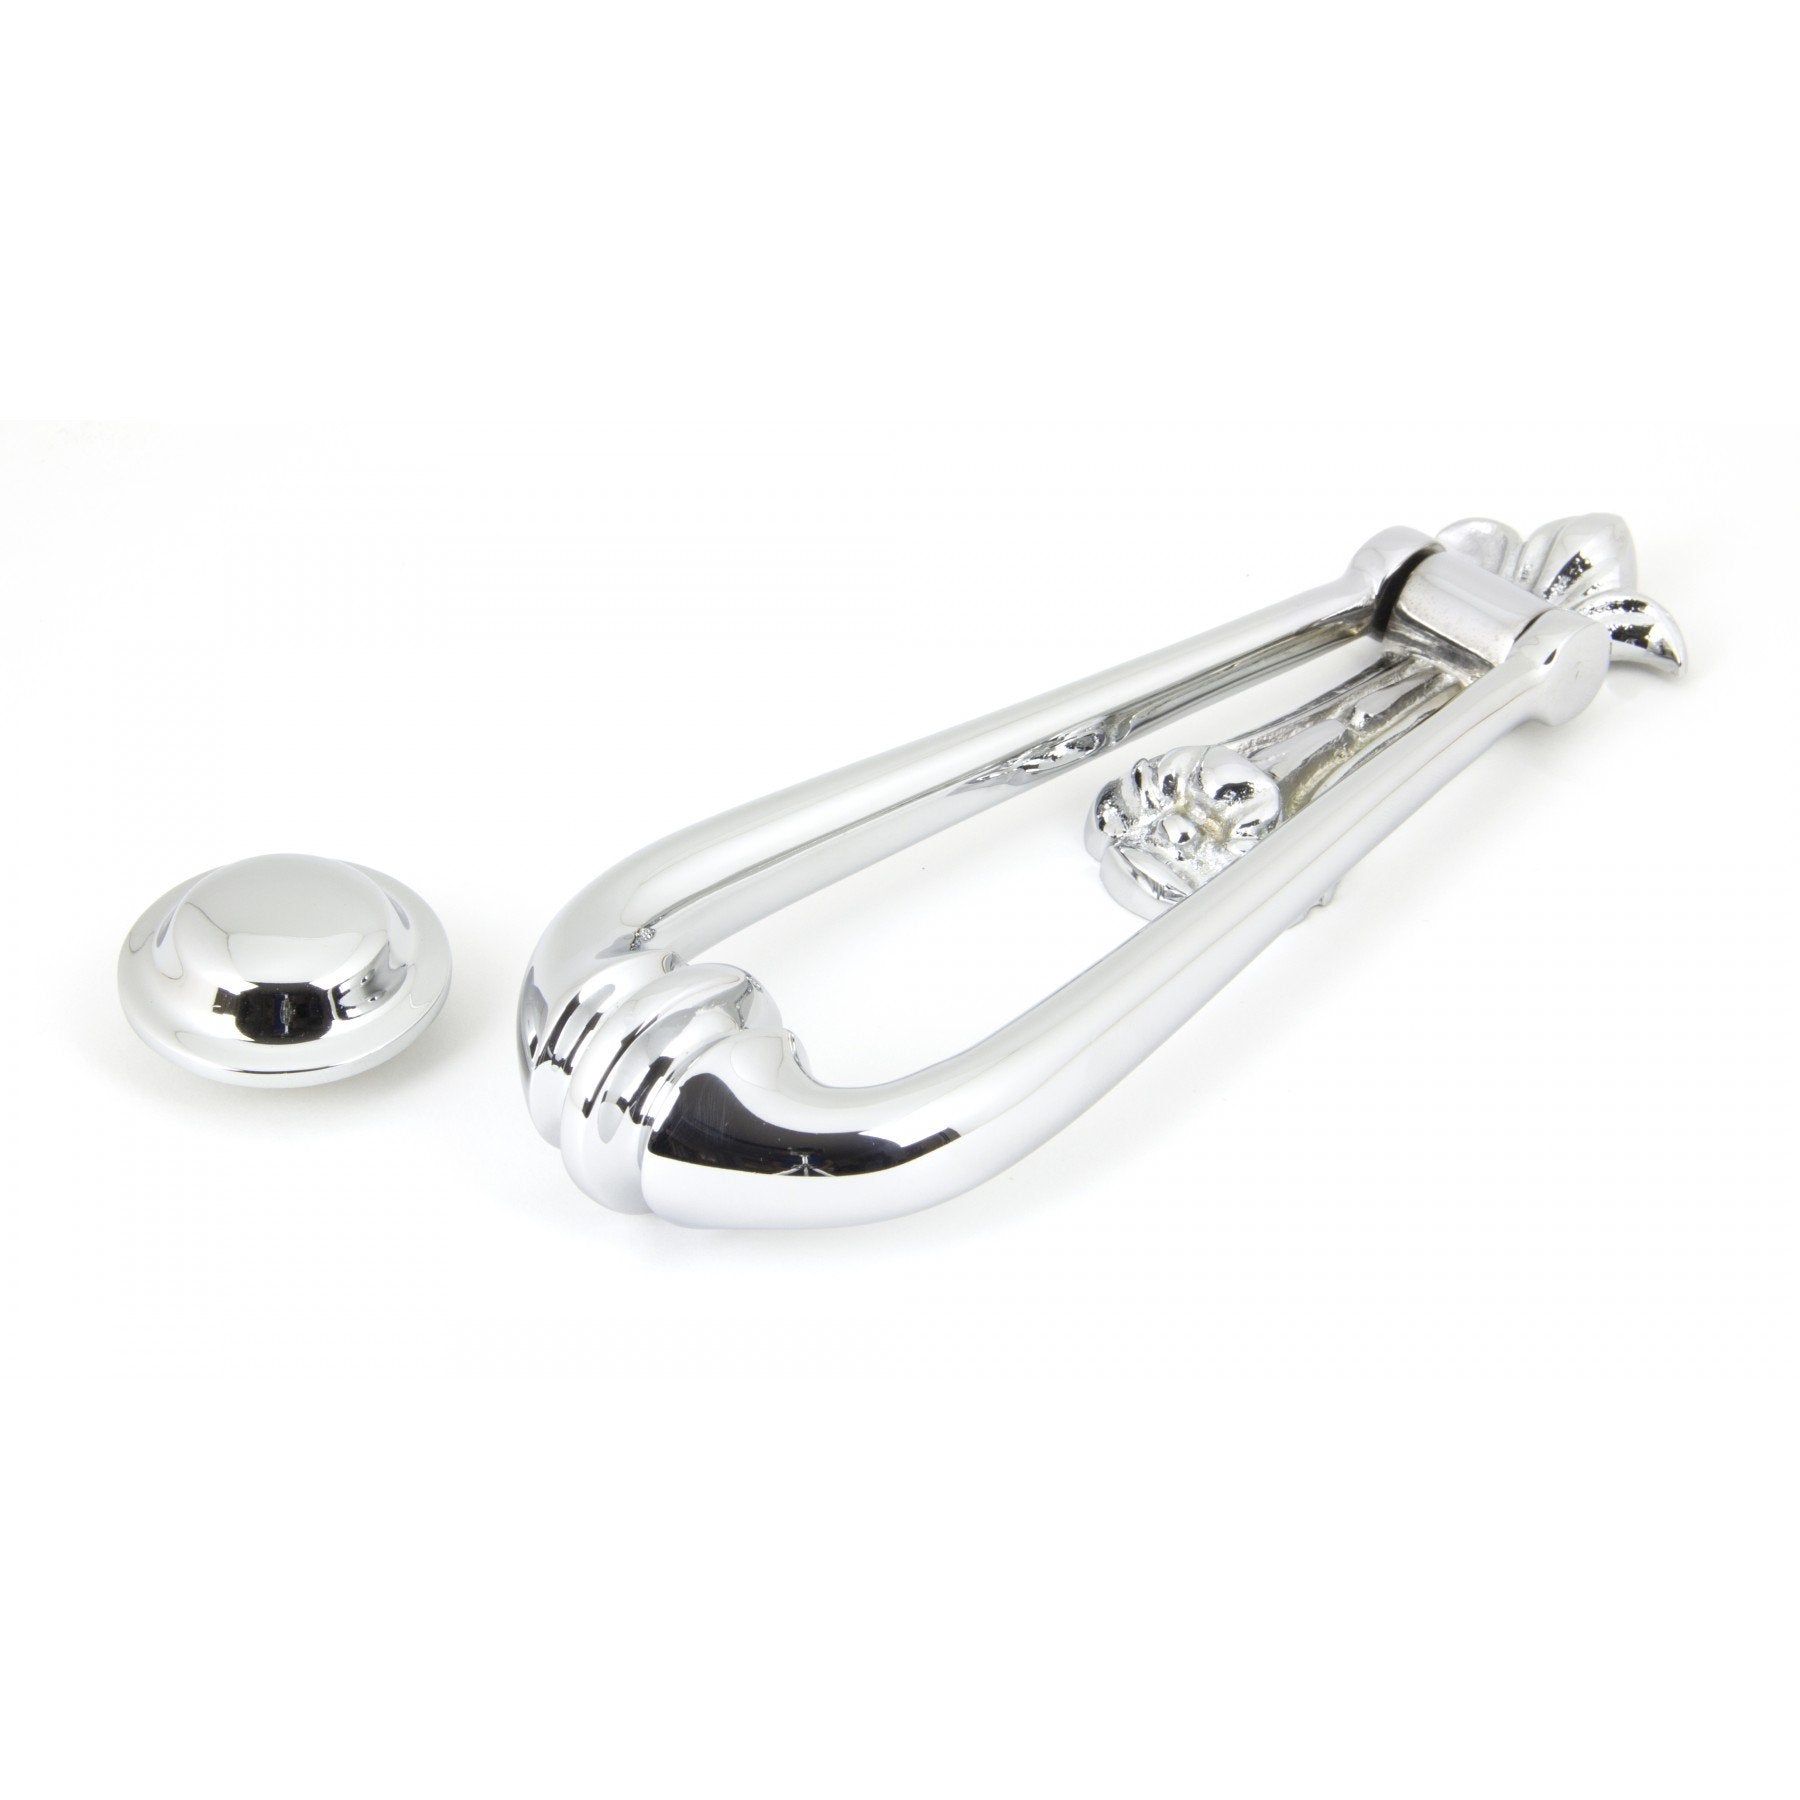 From the Anvil Polished Chrome Loop Door Knocker - No.42 Interiors